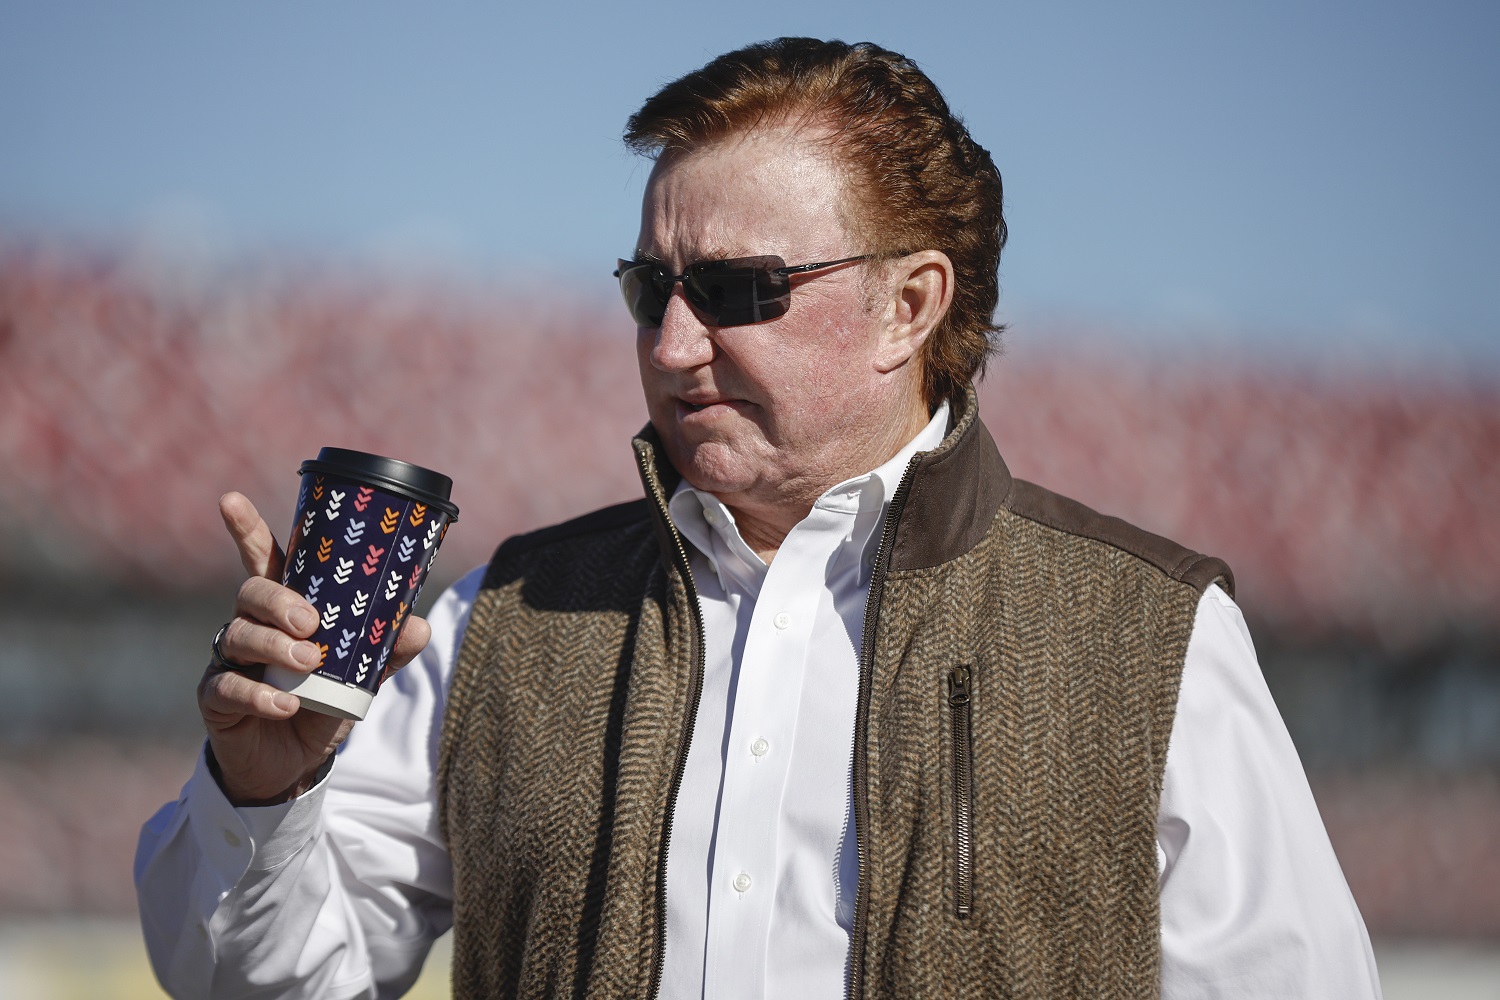 RCR team owner and NASCAR Hall of Famer Richard Childress walks the grid during qualifying for the NASCAR Cup Series YellaWood 500 at Talladega Superspeedway on Oct. 1, 2022. | Sean Gardner/Getty Images